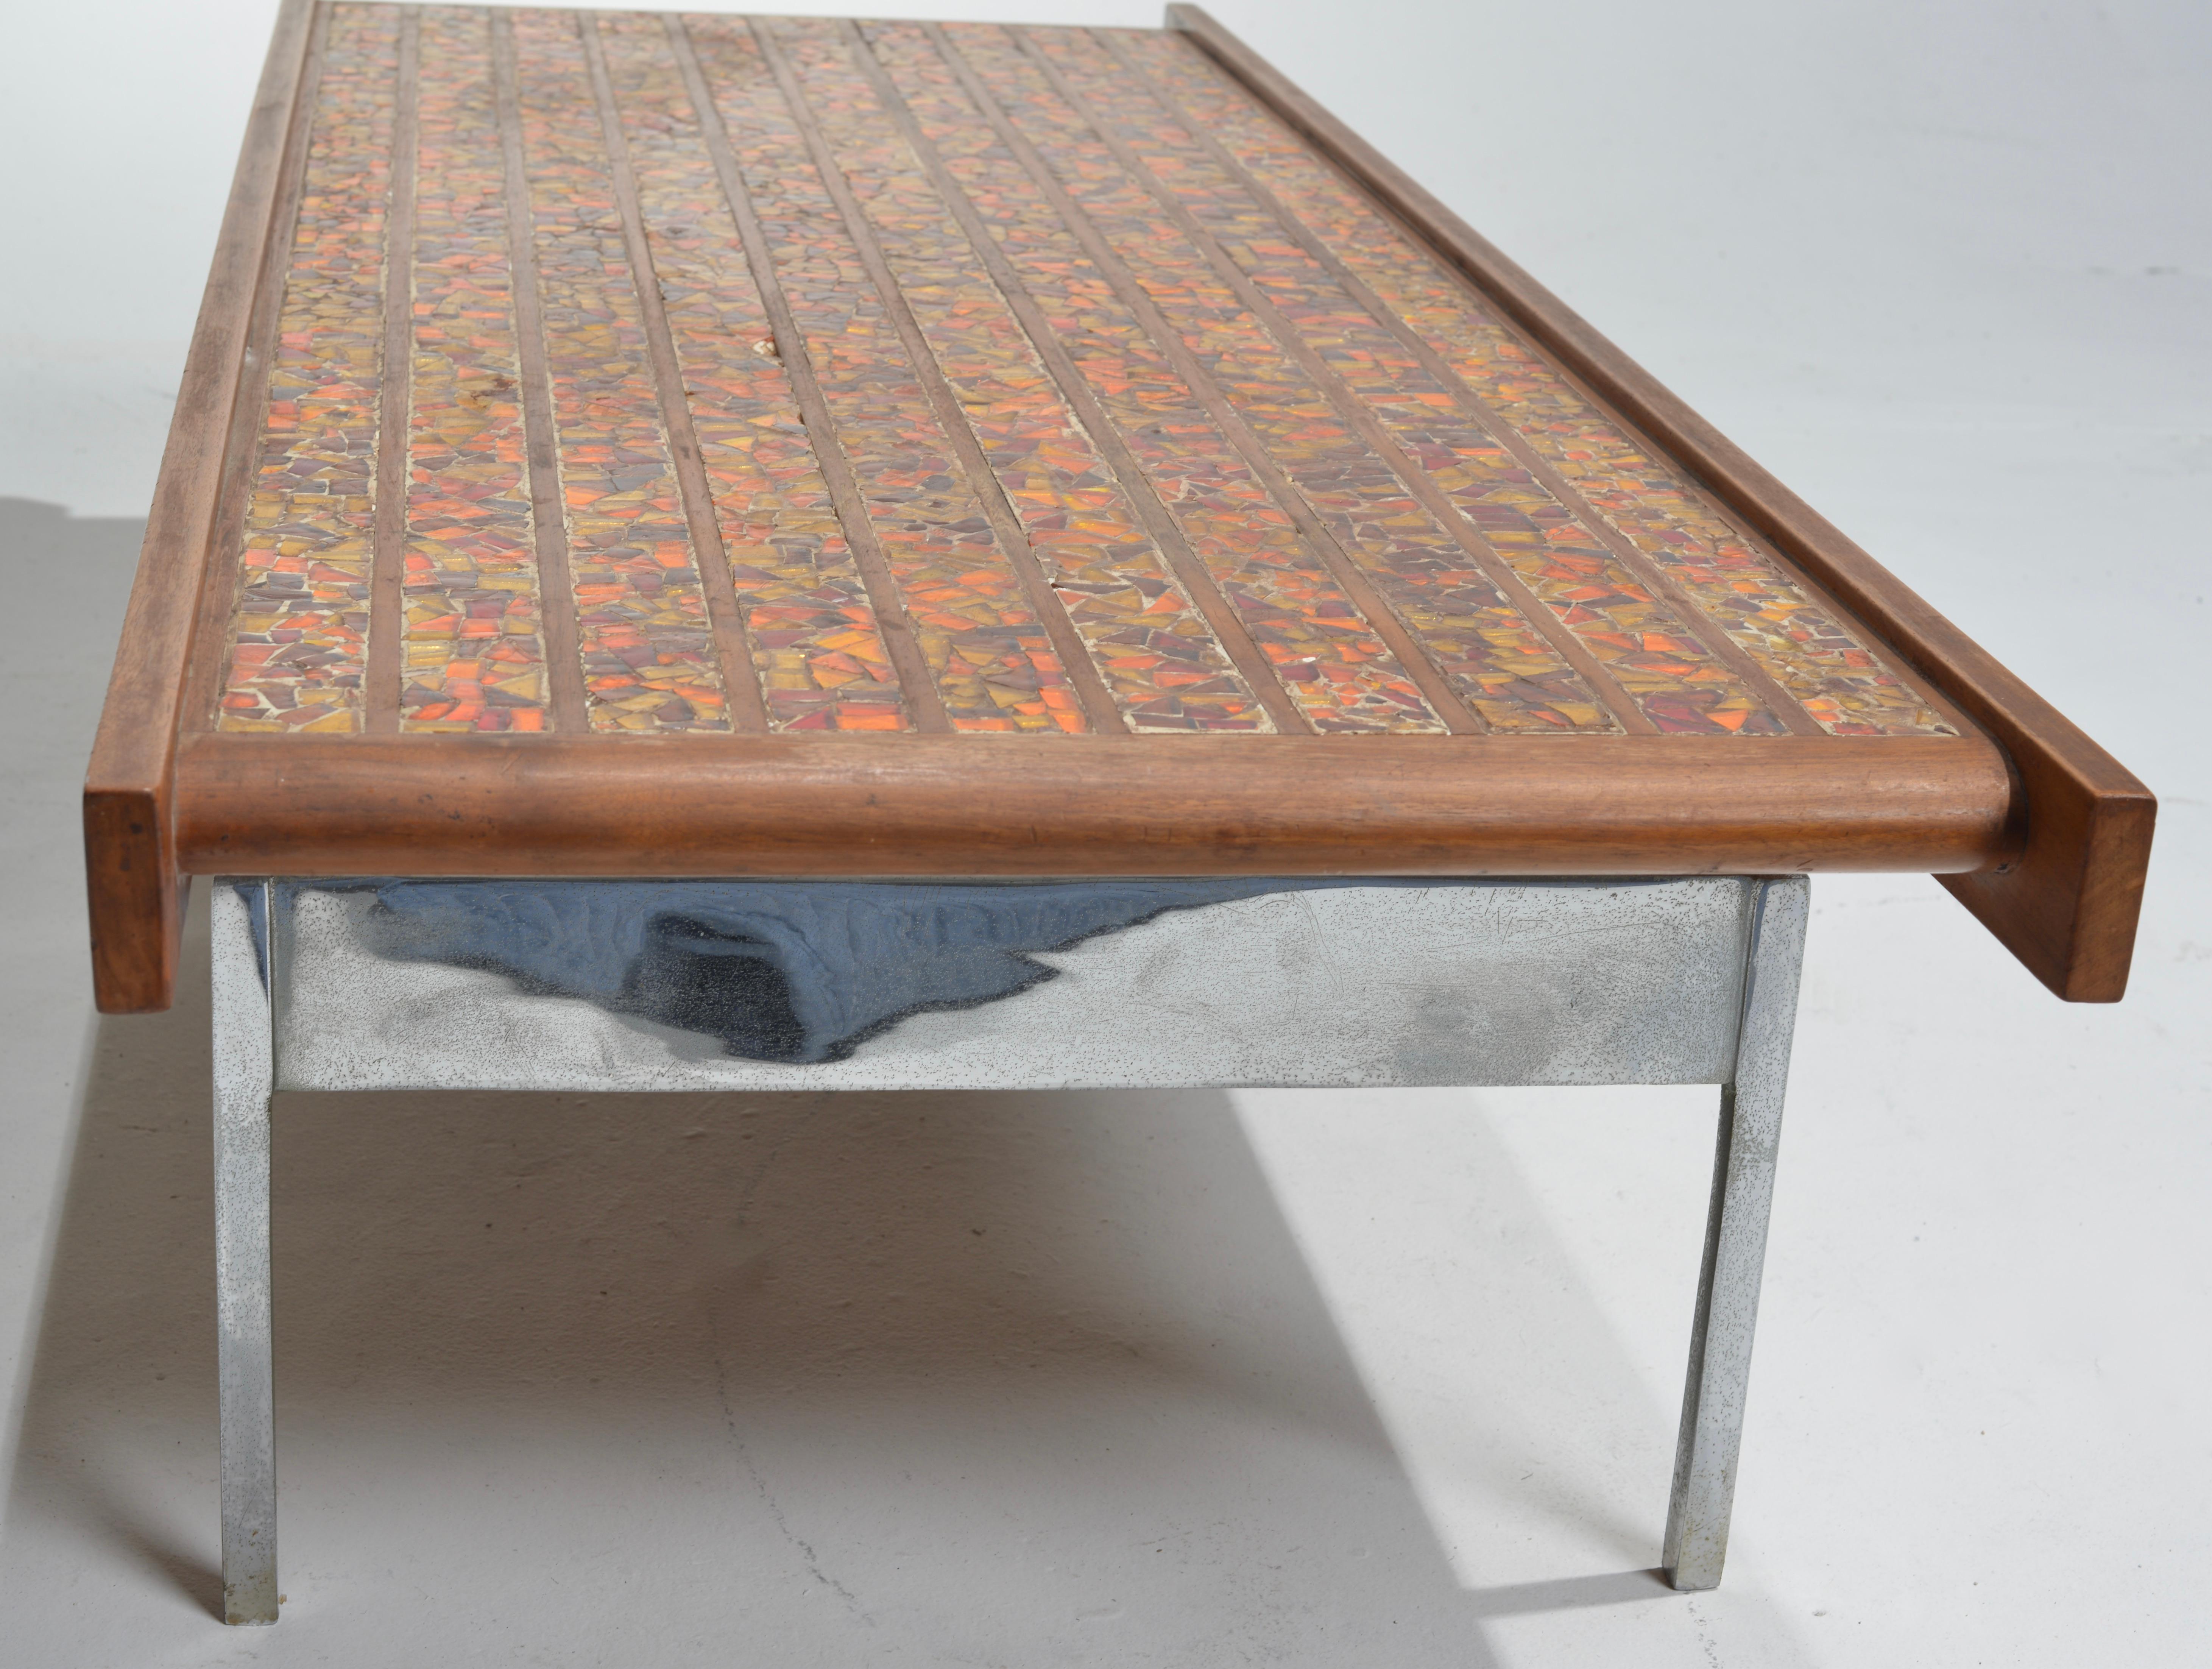 Modernist Tile, Wood and Chrome Rectangular Coffee Table For Sale 8